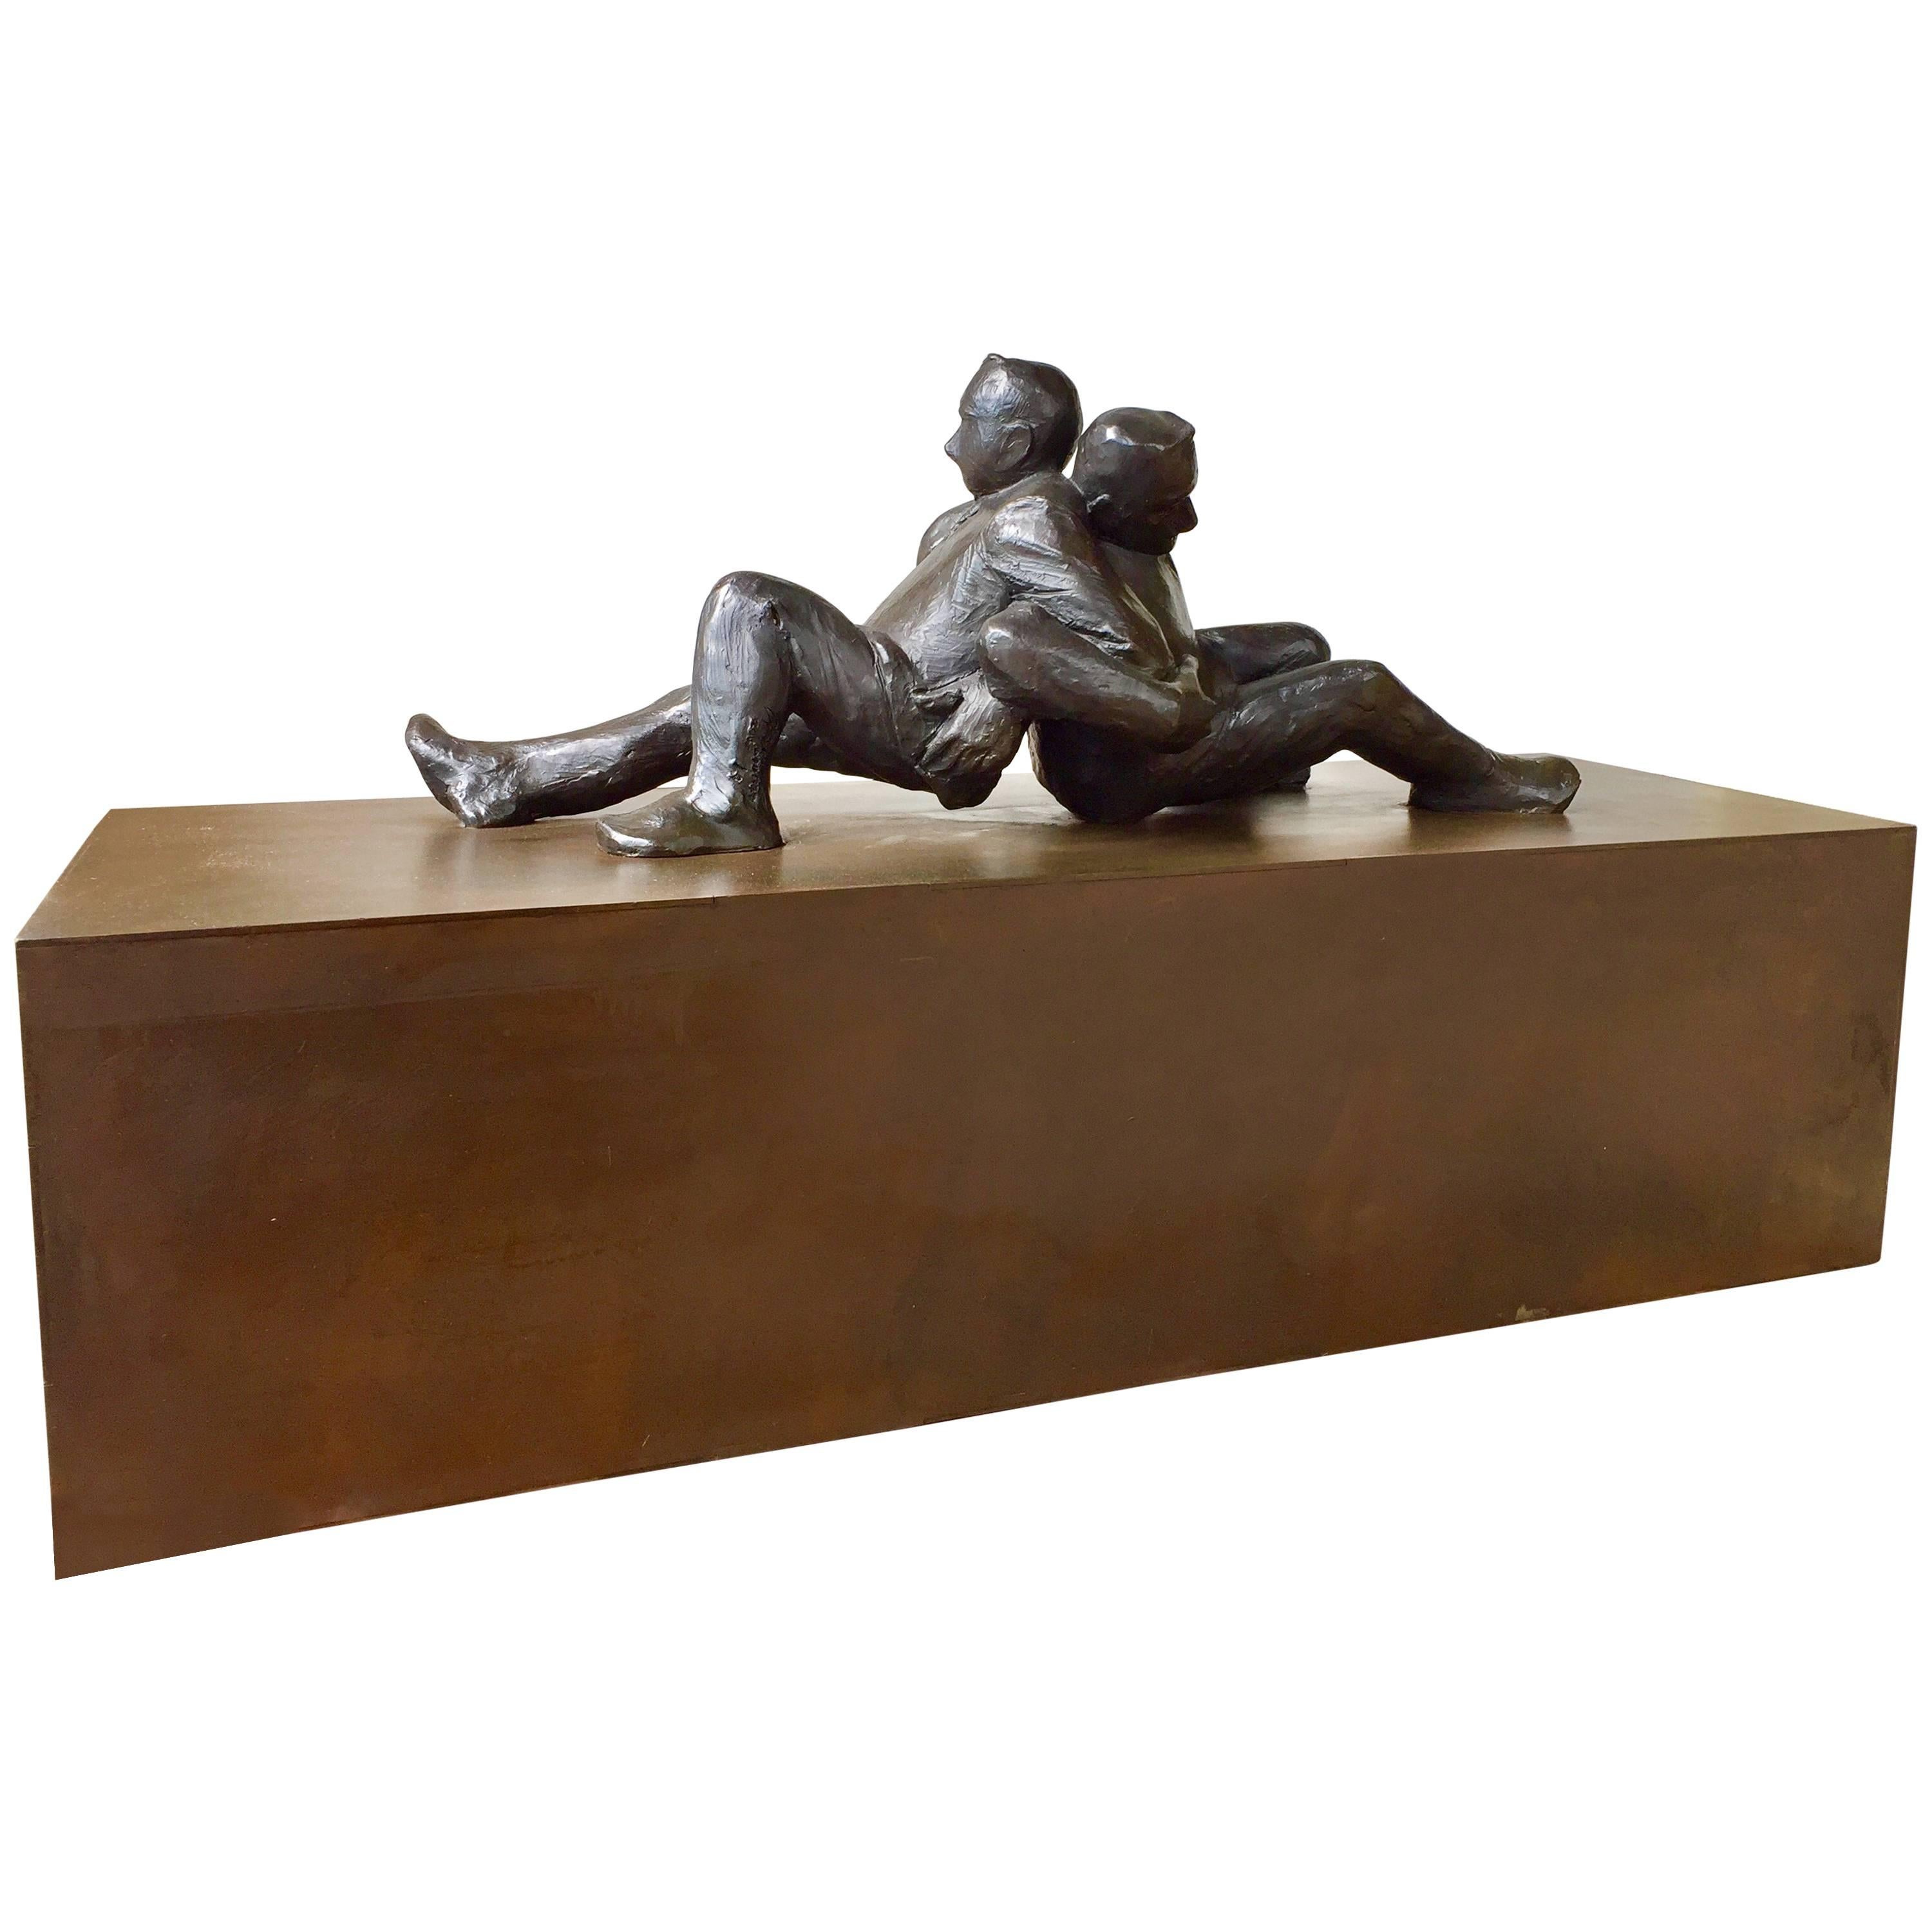 "Daily Grind" Bronze and Steel Business Sculpture by Jim Rennert